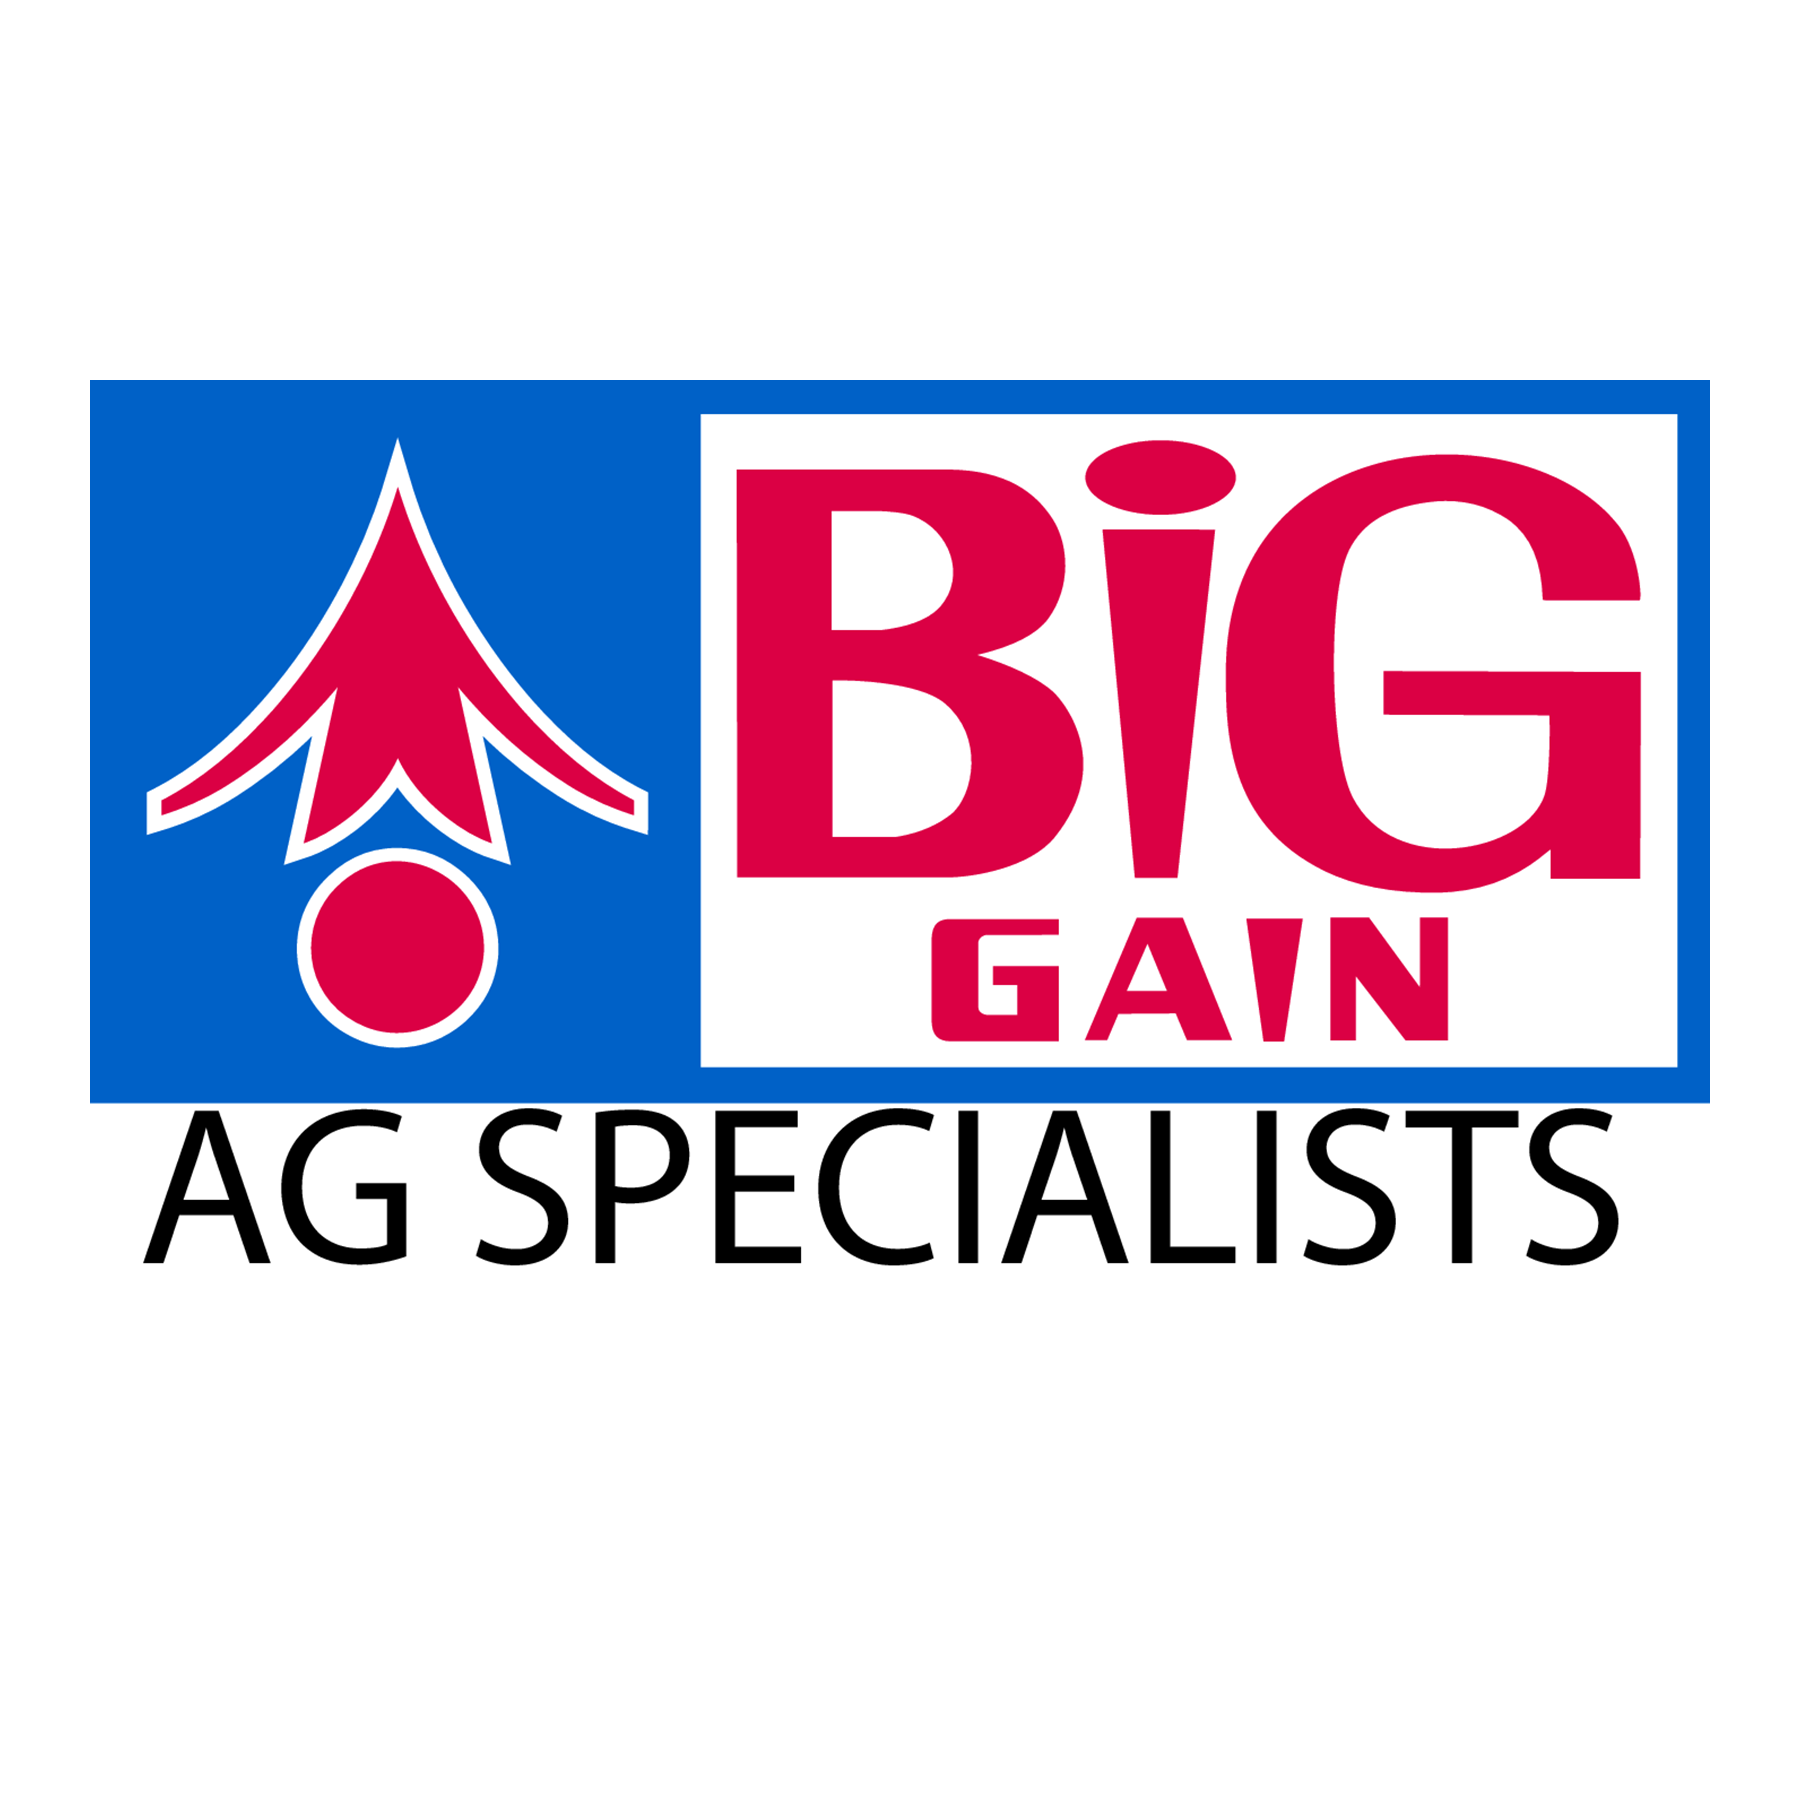 Ag Specialists